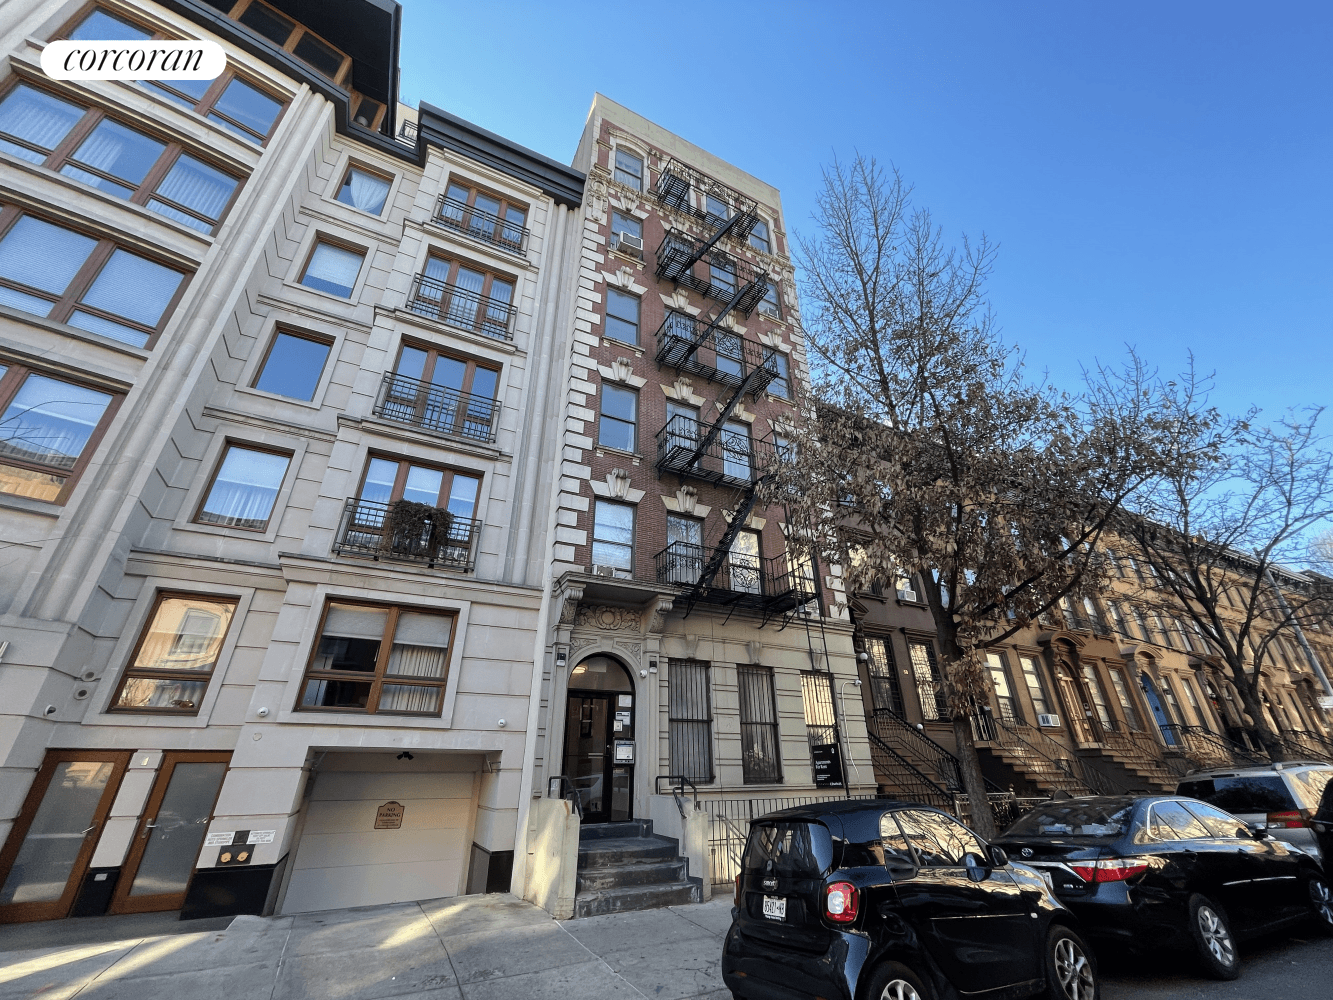 Enjoy a quiet tree lined street and live in this Sparkling Fully Gut Renovated 2 bedroom located in Prime Central Harlem !